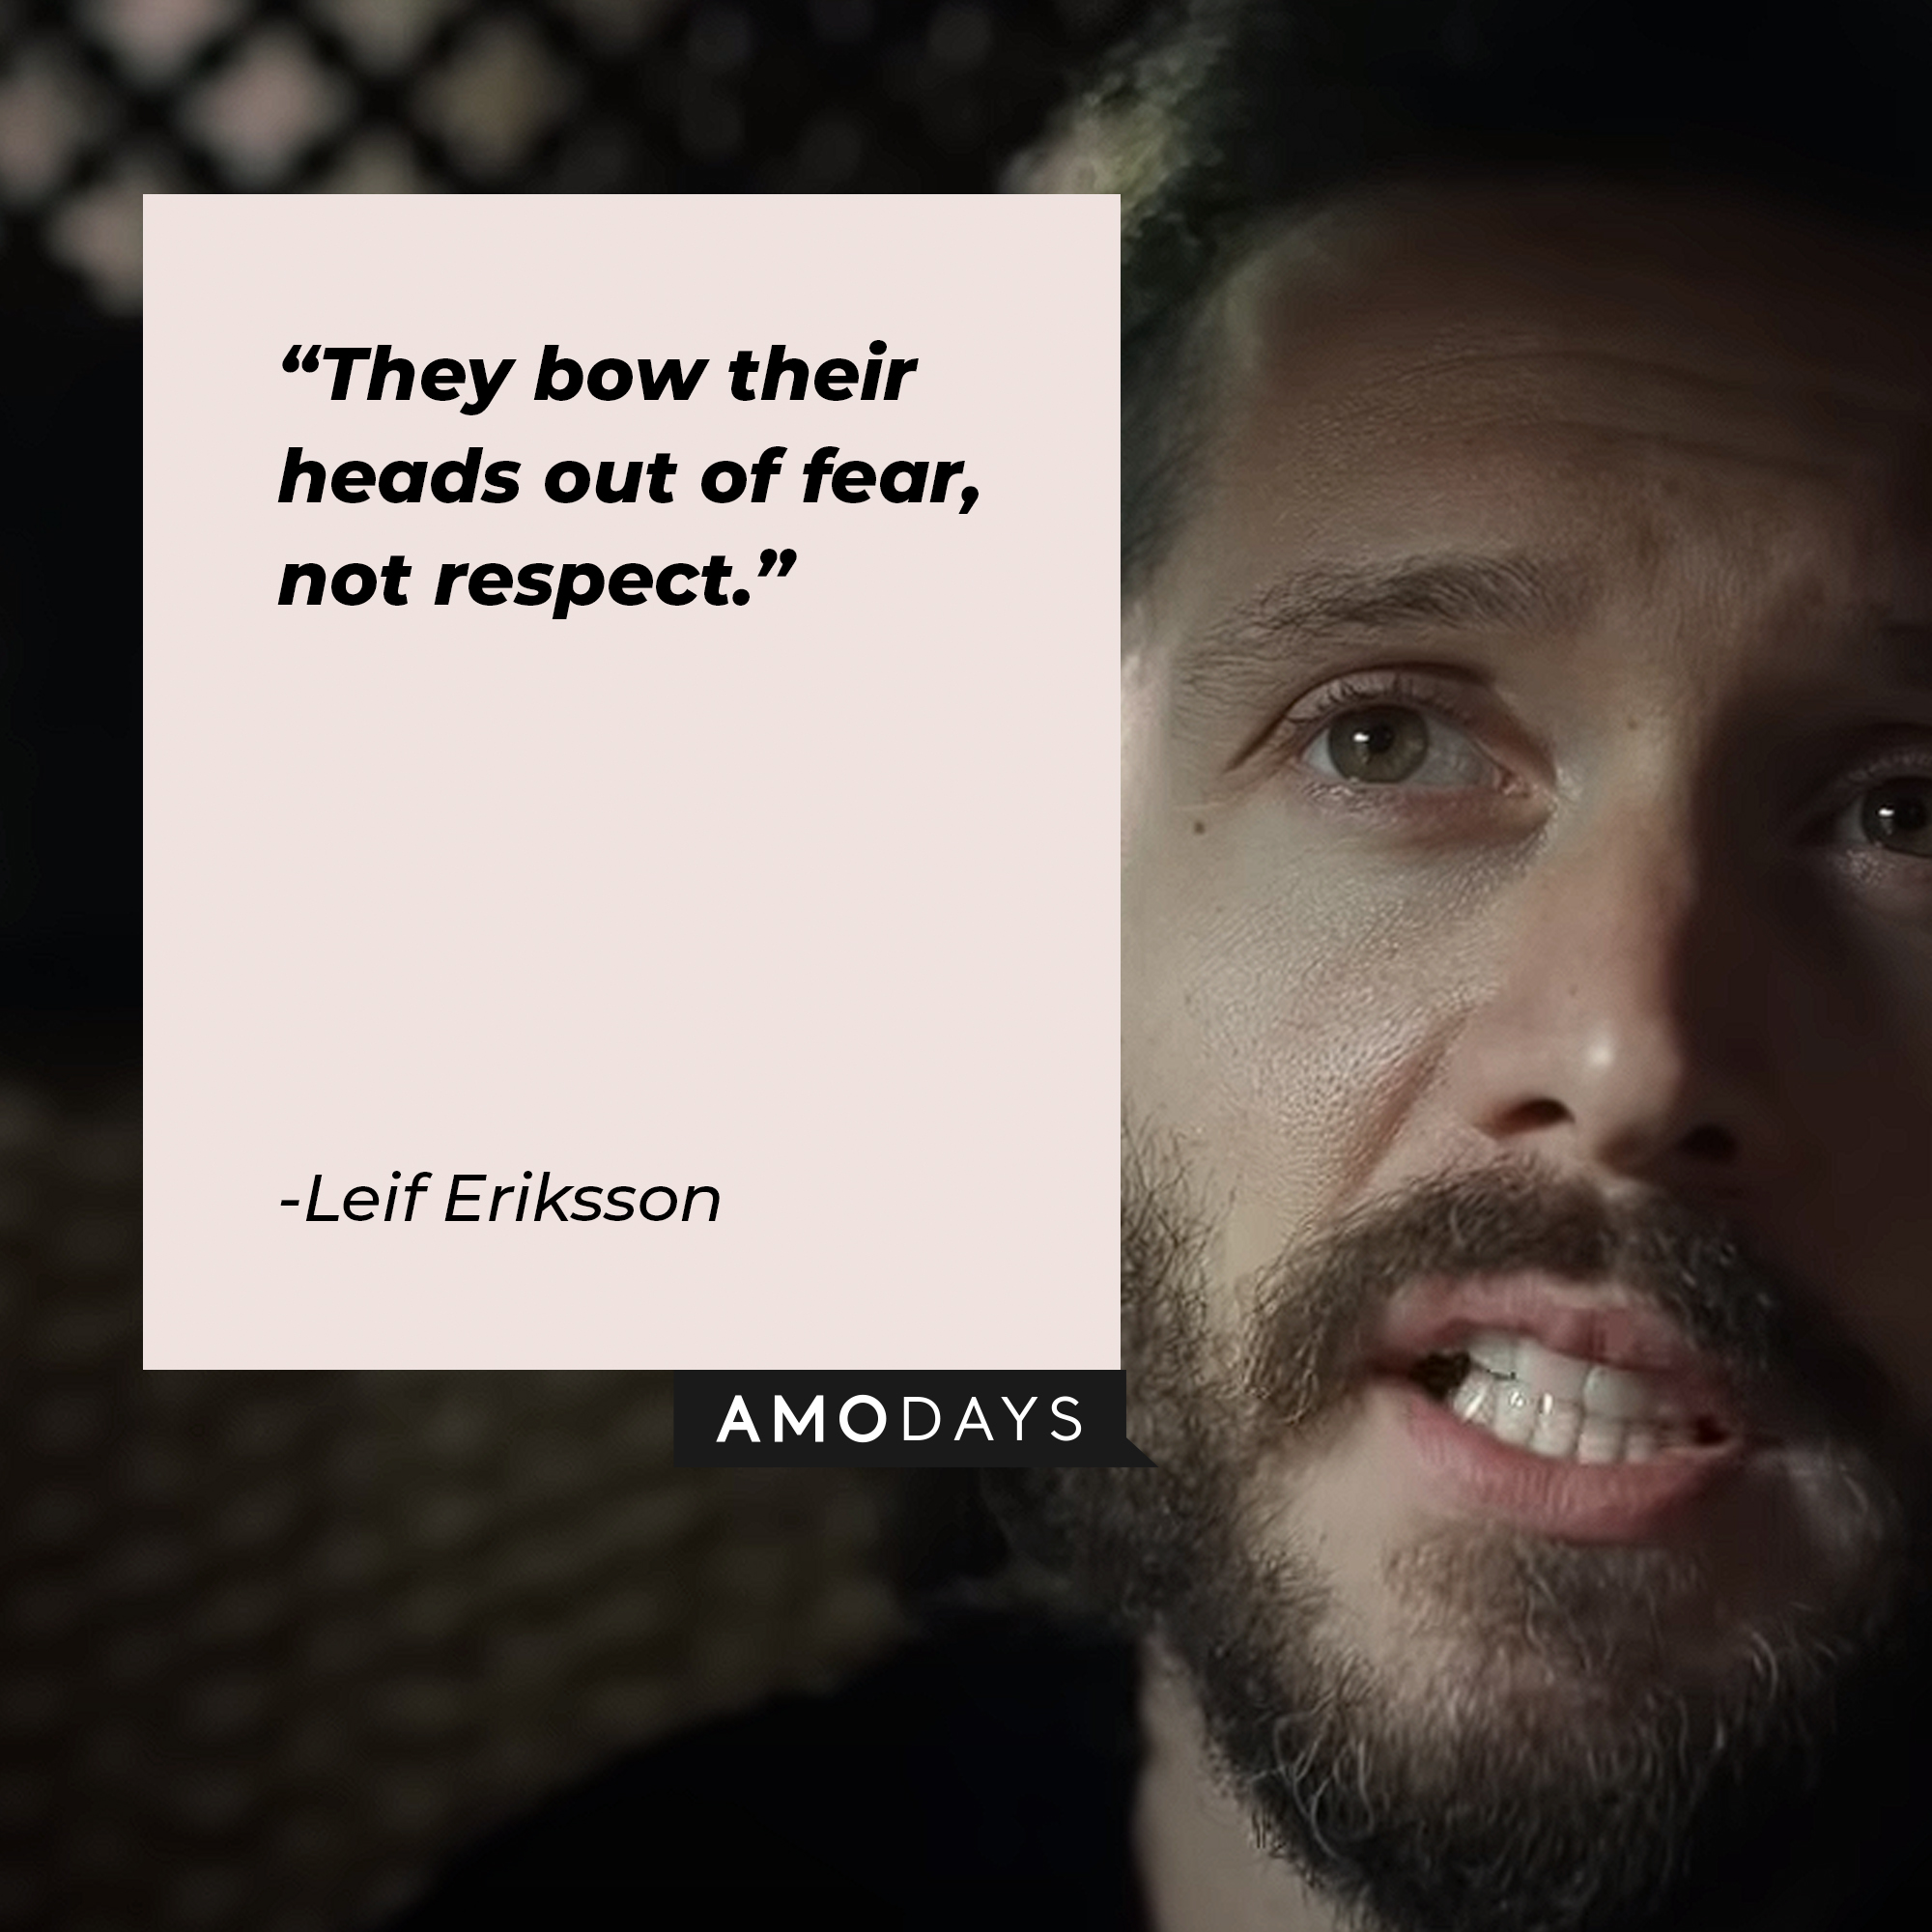 Leif Eriksson's quote: "They bow their heads out of fear, not respect." | Image: youtube.com/Netflix